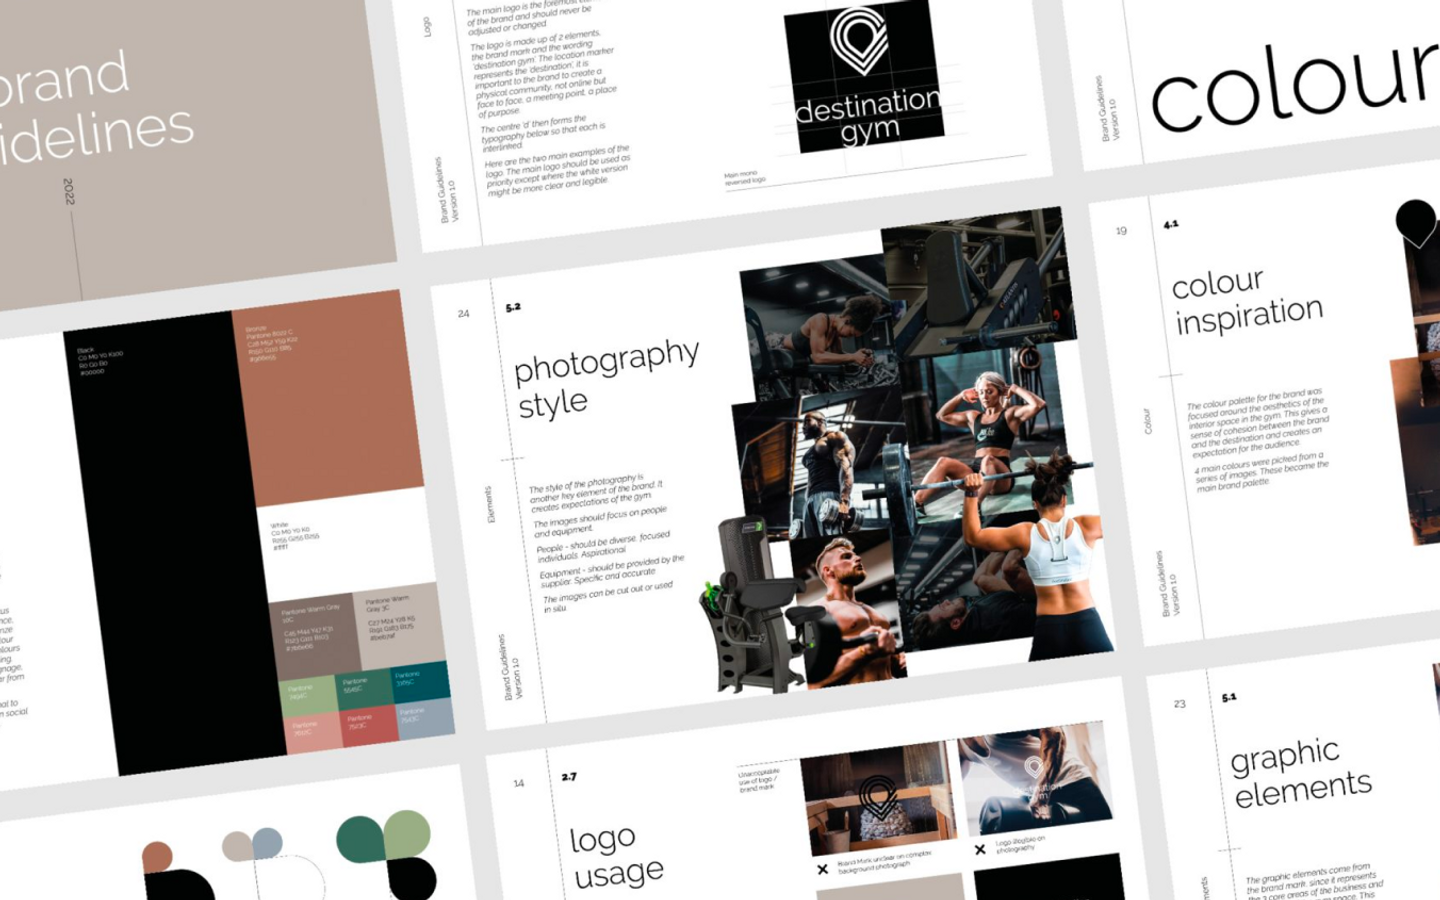 Collage of 'destination gym' brand guidelines showing logo design, colour palette with earthy tones, and dynamic gym photography to establish a cohesive brand identity.